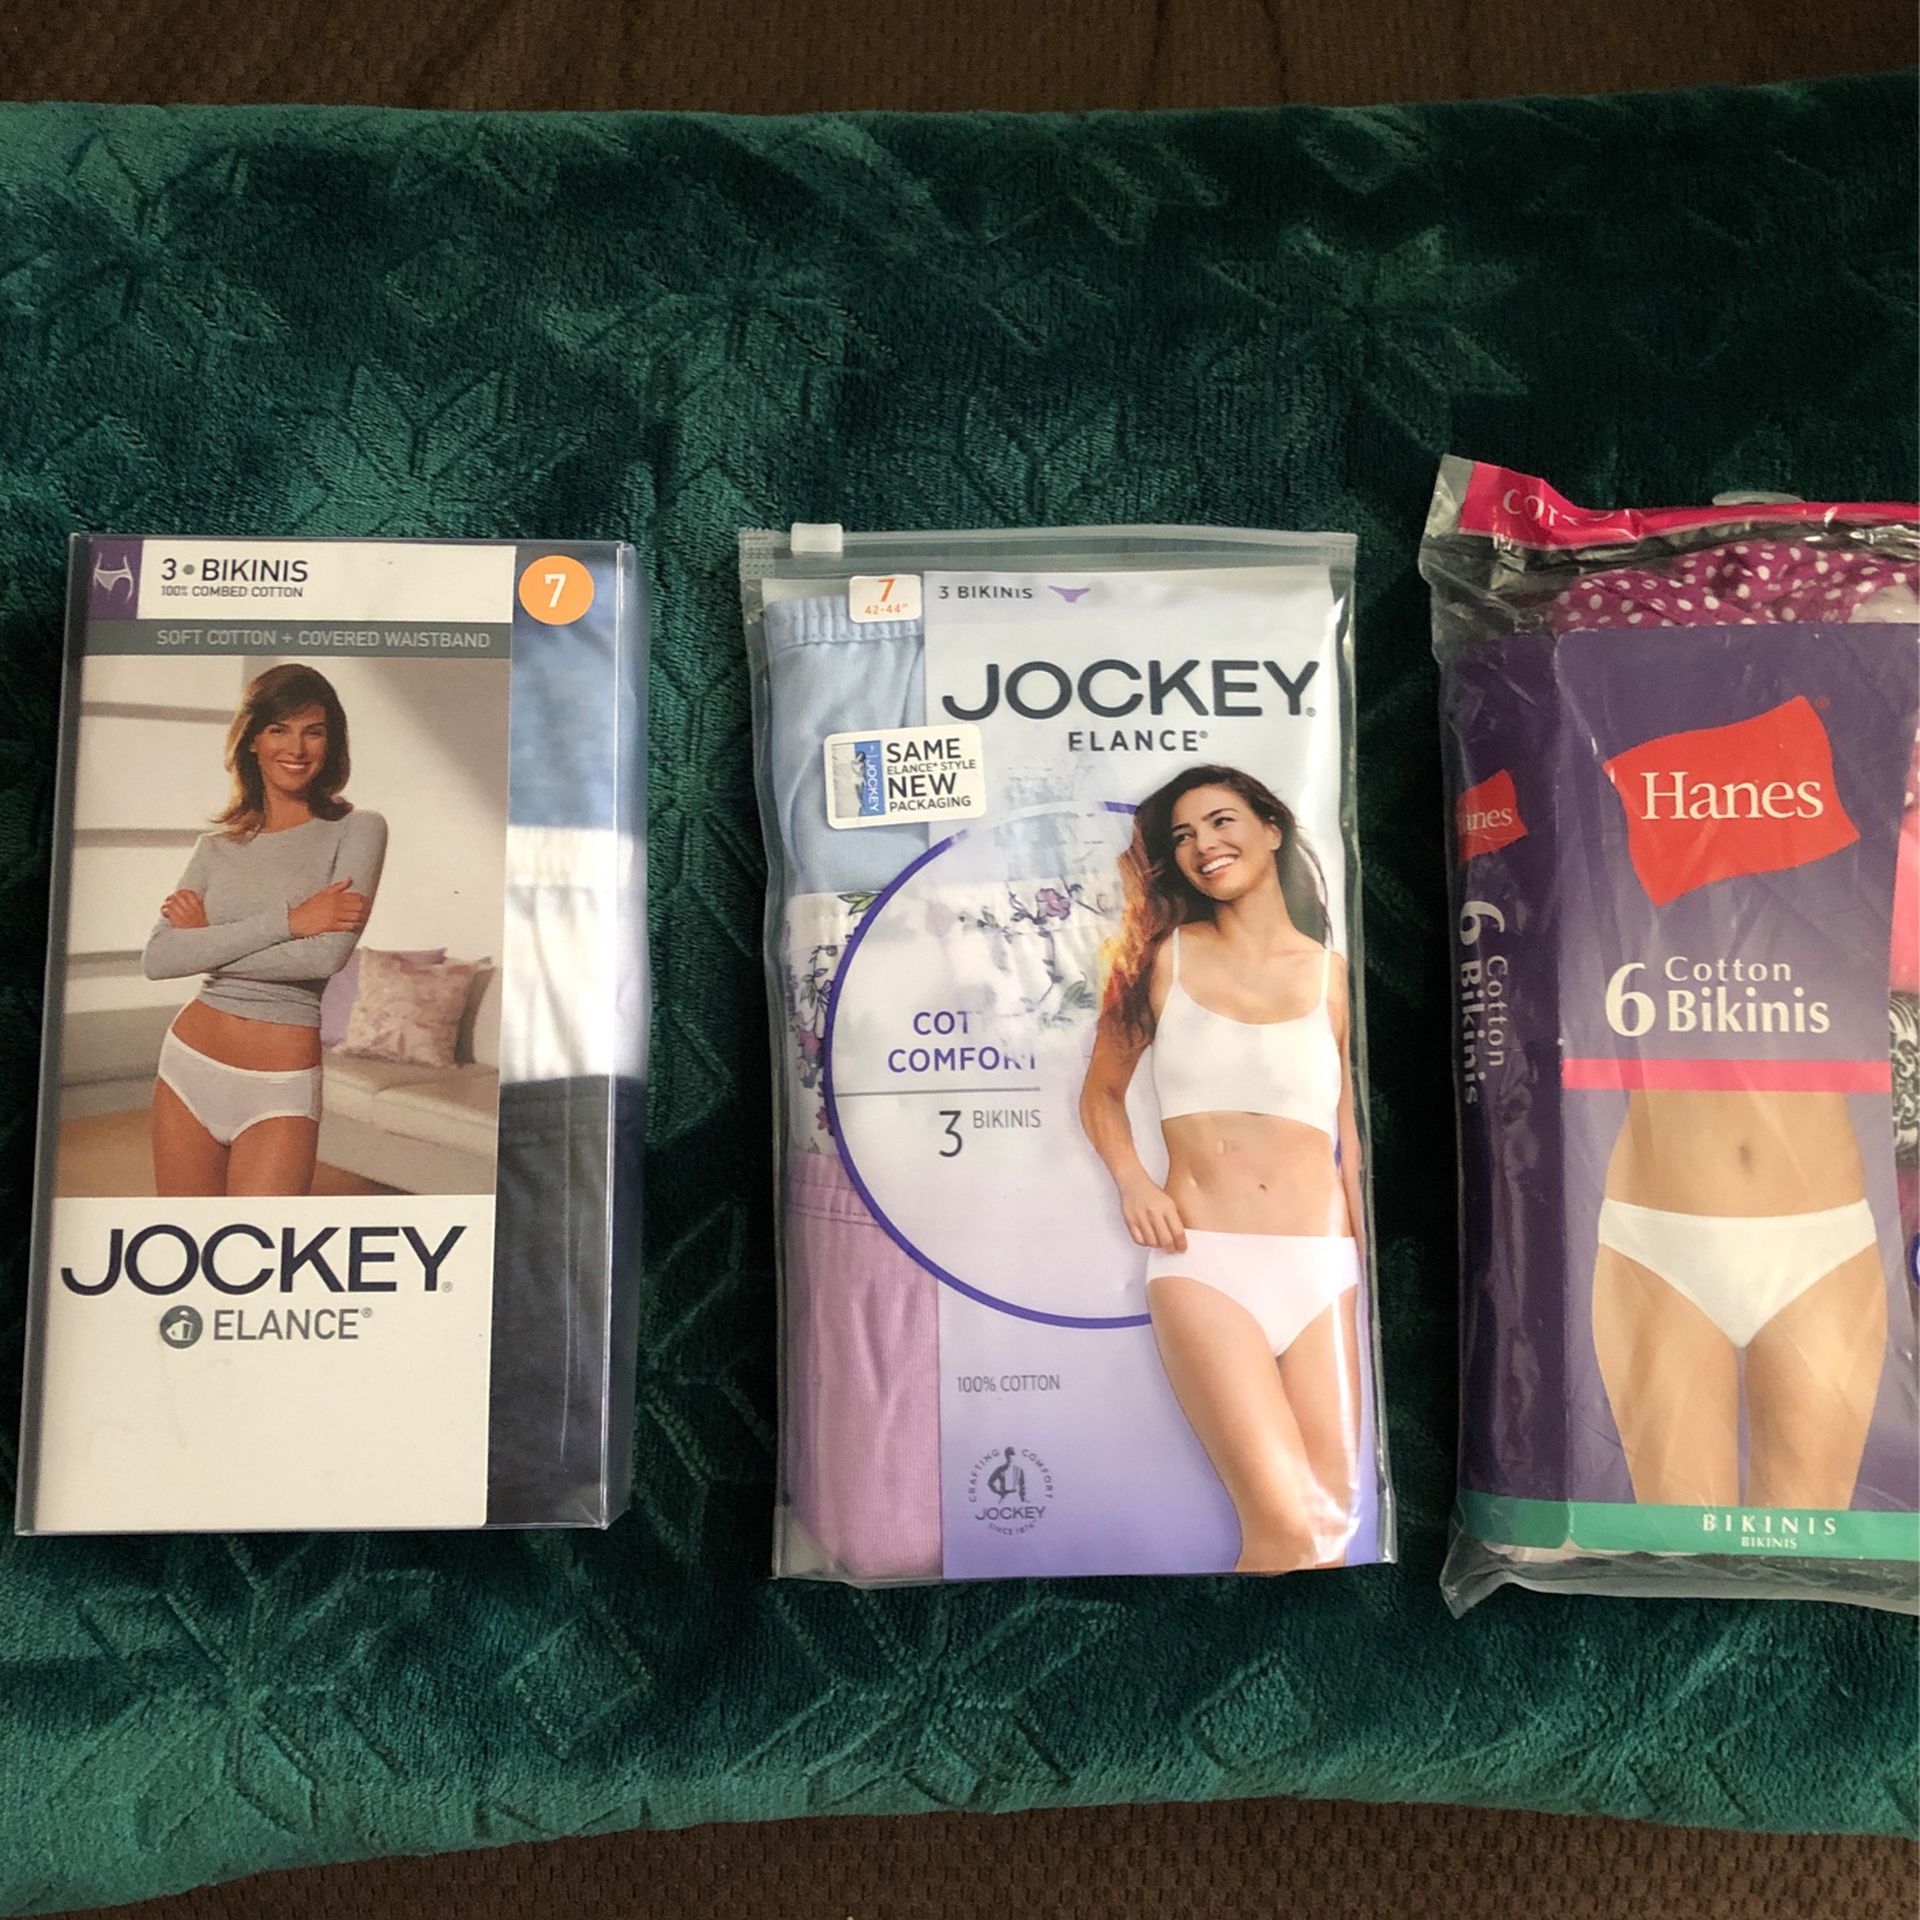 All New, Size 7 Two Packages Of Jockey, 1 Hanes